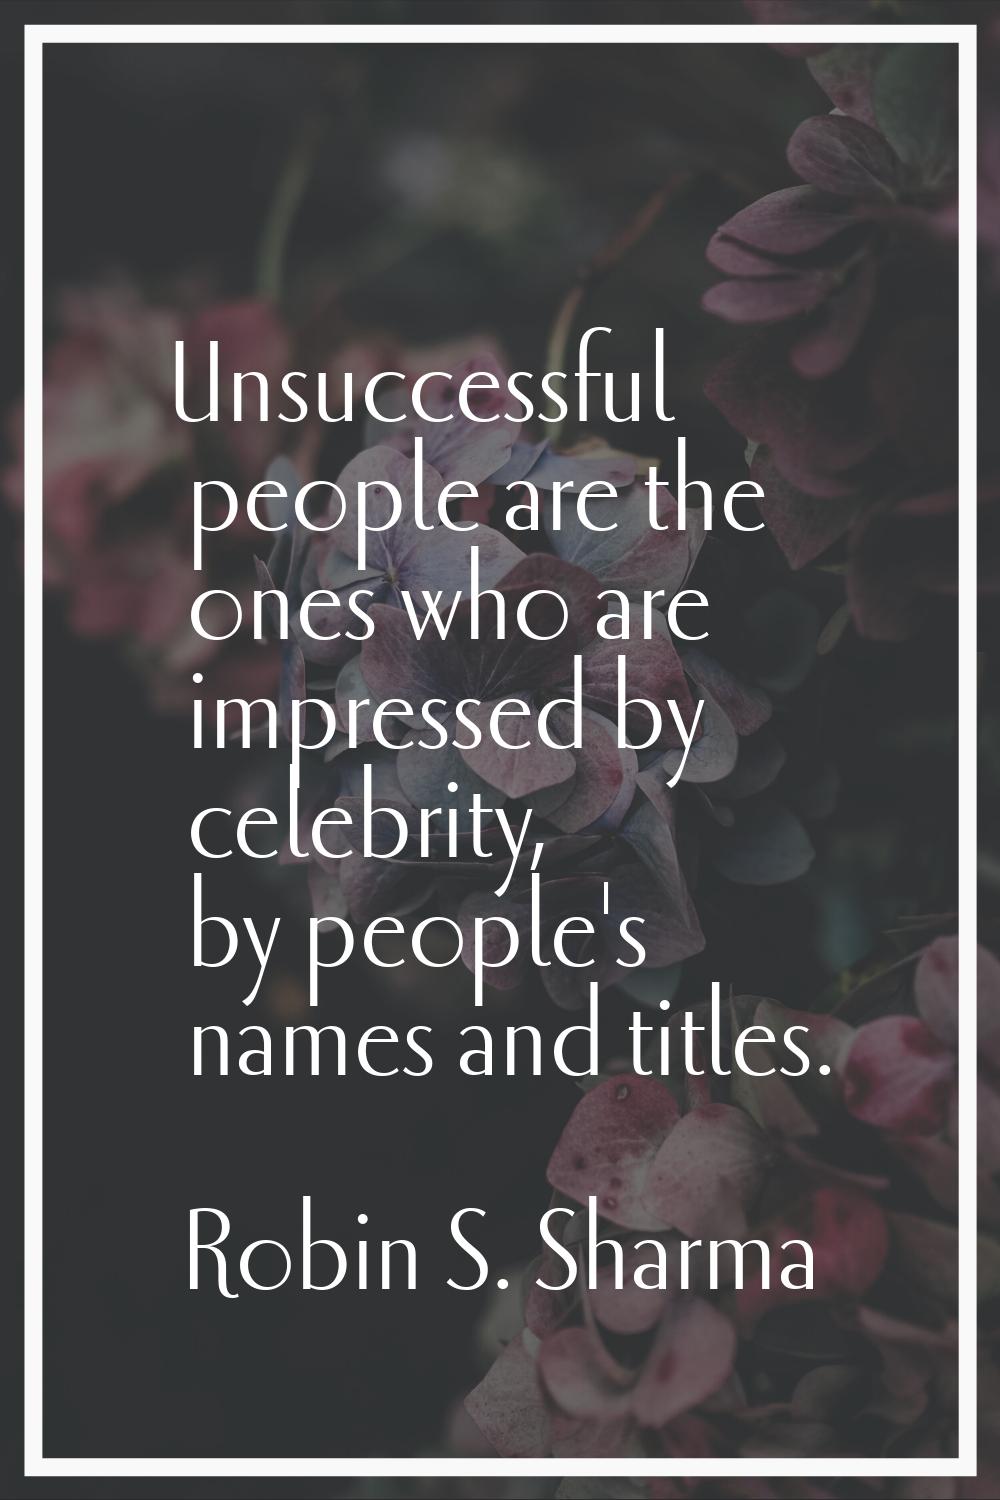 Unsuccessful people are the ones who are impressed by celebrity, by people's names and titles.